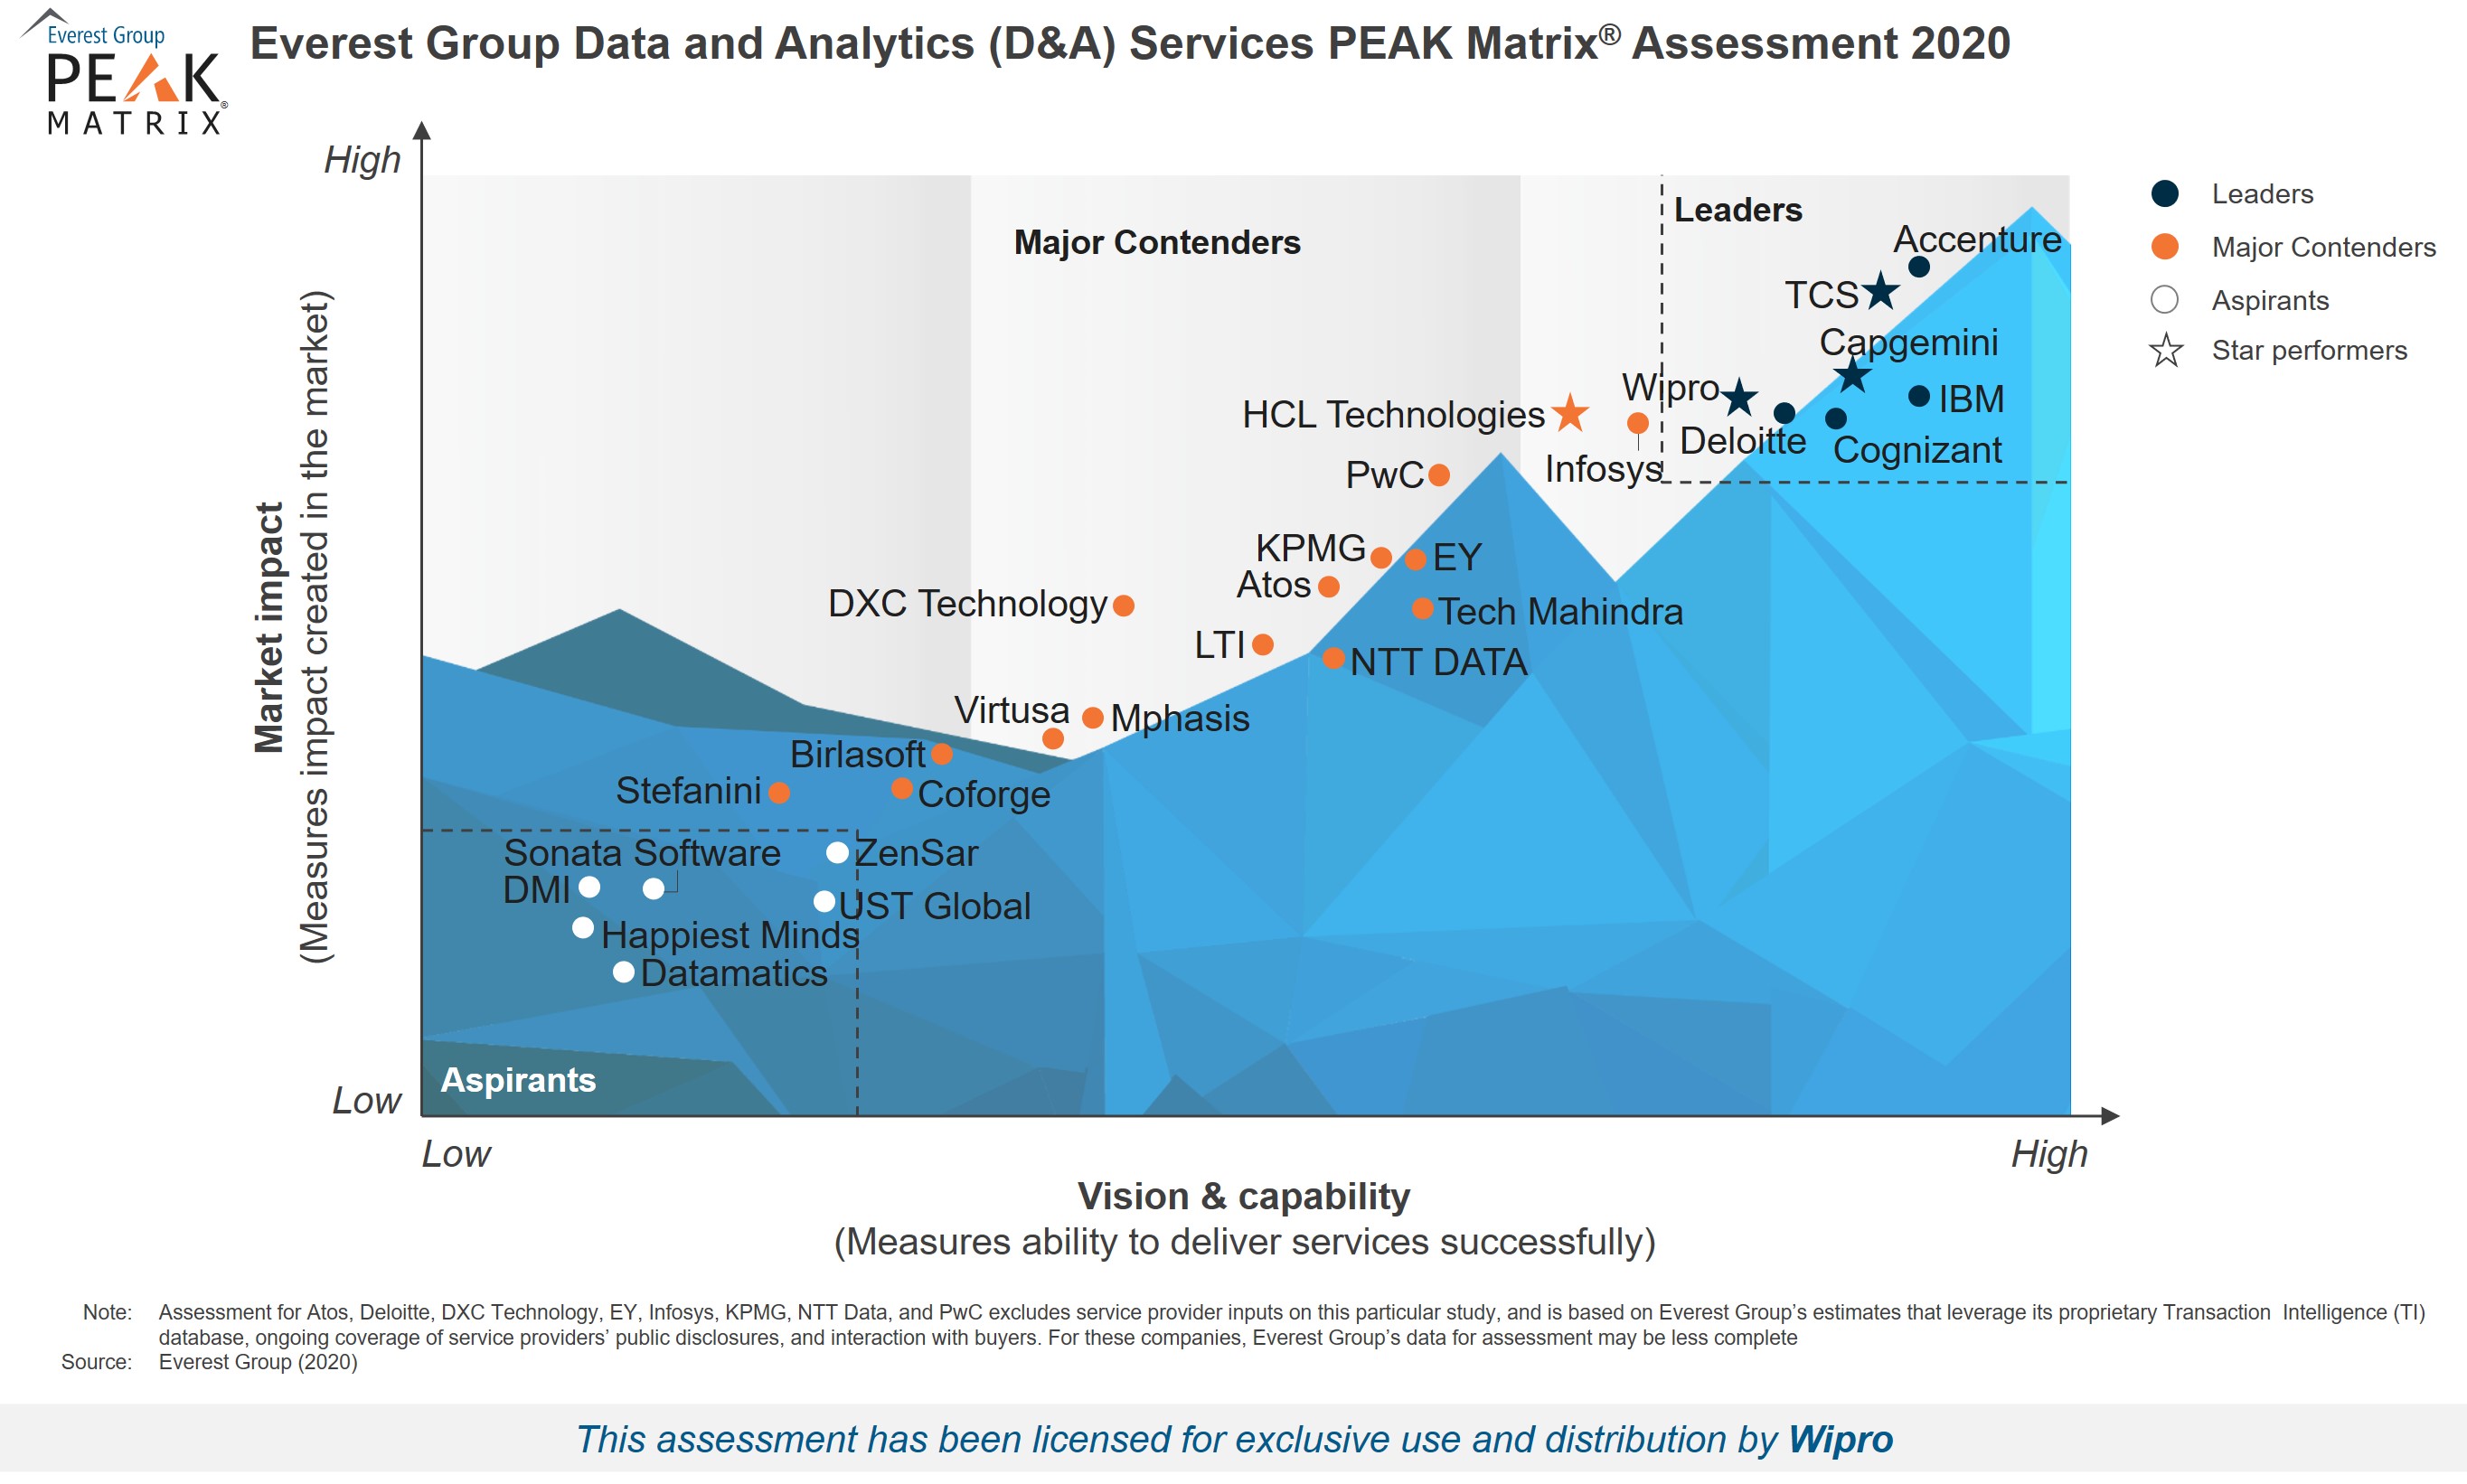 Wipro positioned as a Leader & Star Performer by Everest Group in Data & Analytics Services PEAK Matrix® Assessment 2020